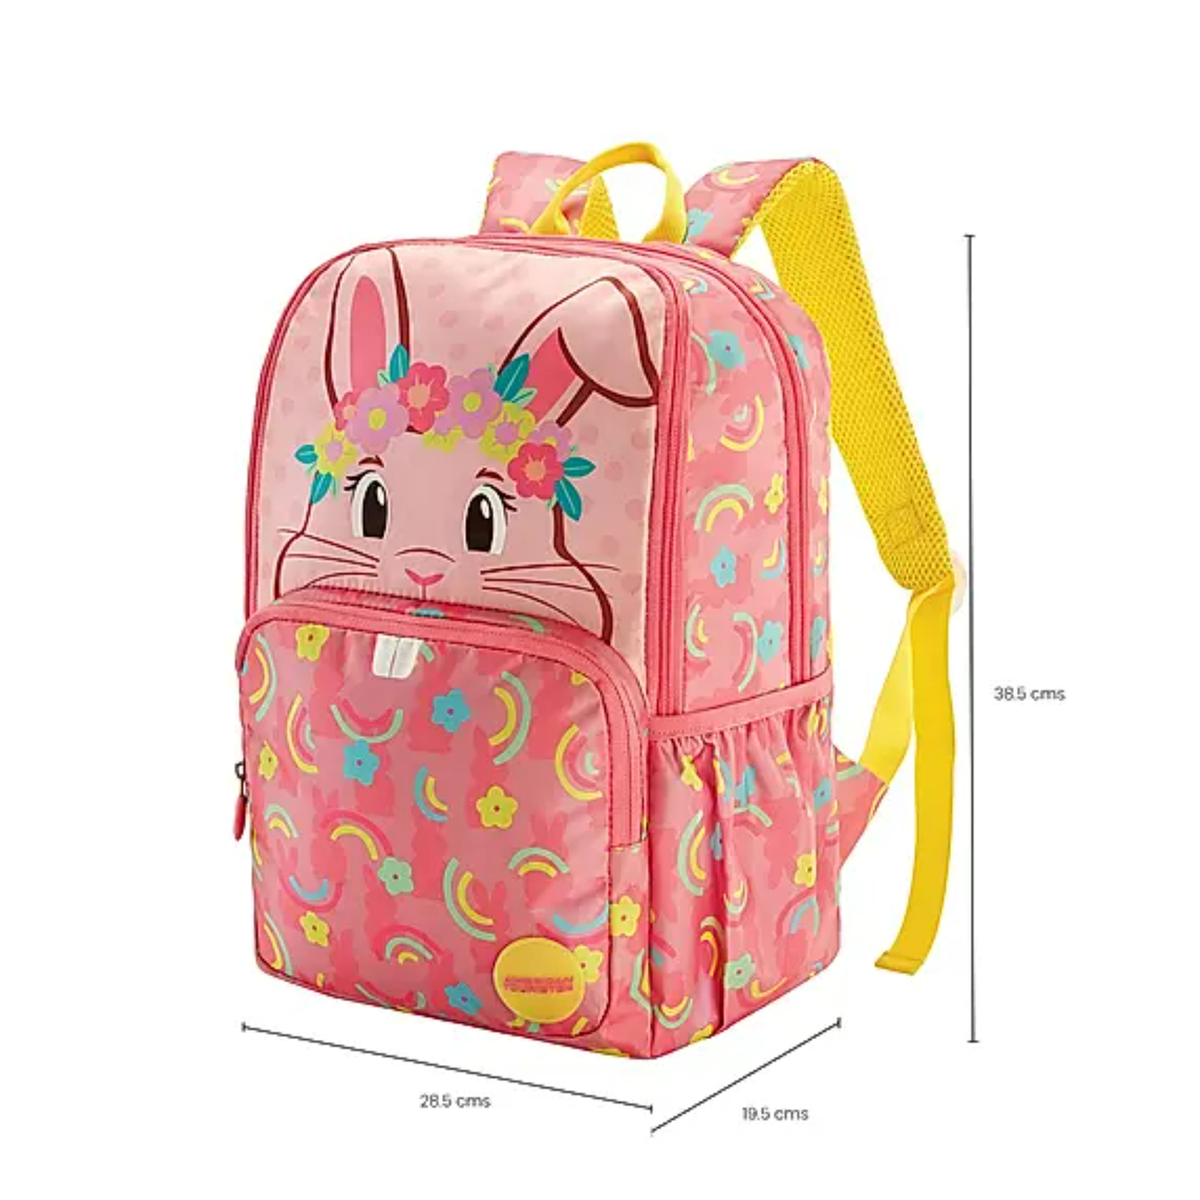 American Tourister Diddle 2.0 School Bagpack, 21 L Volume, Bunny Pink